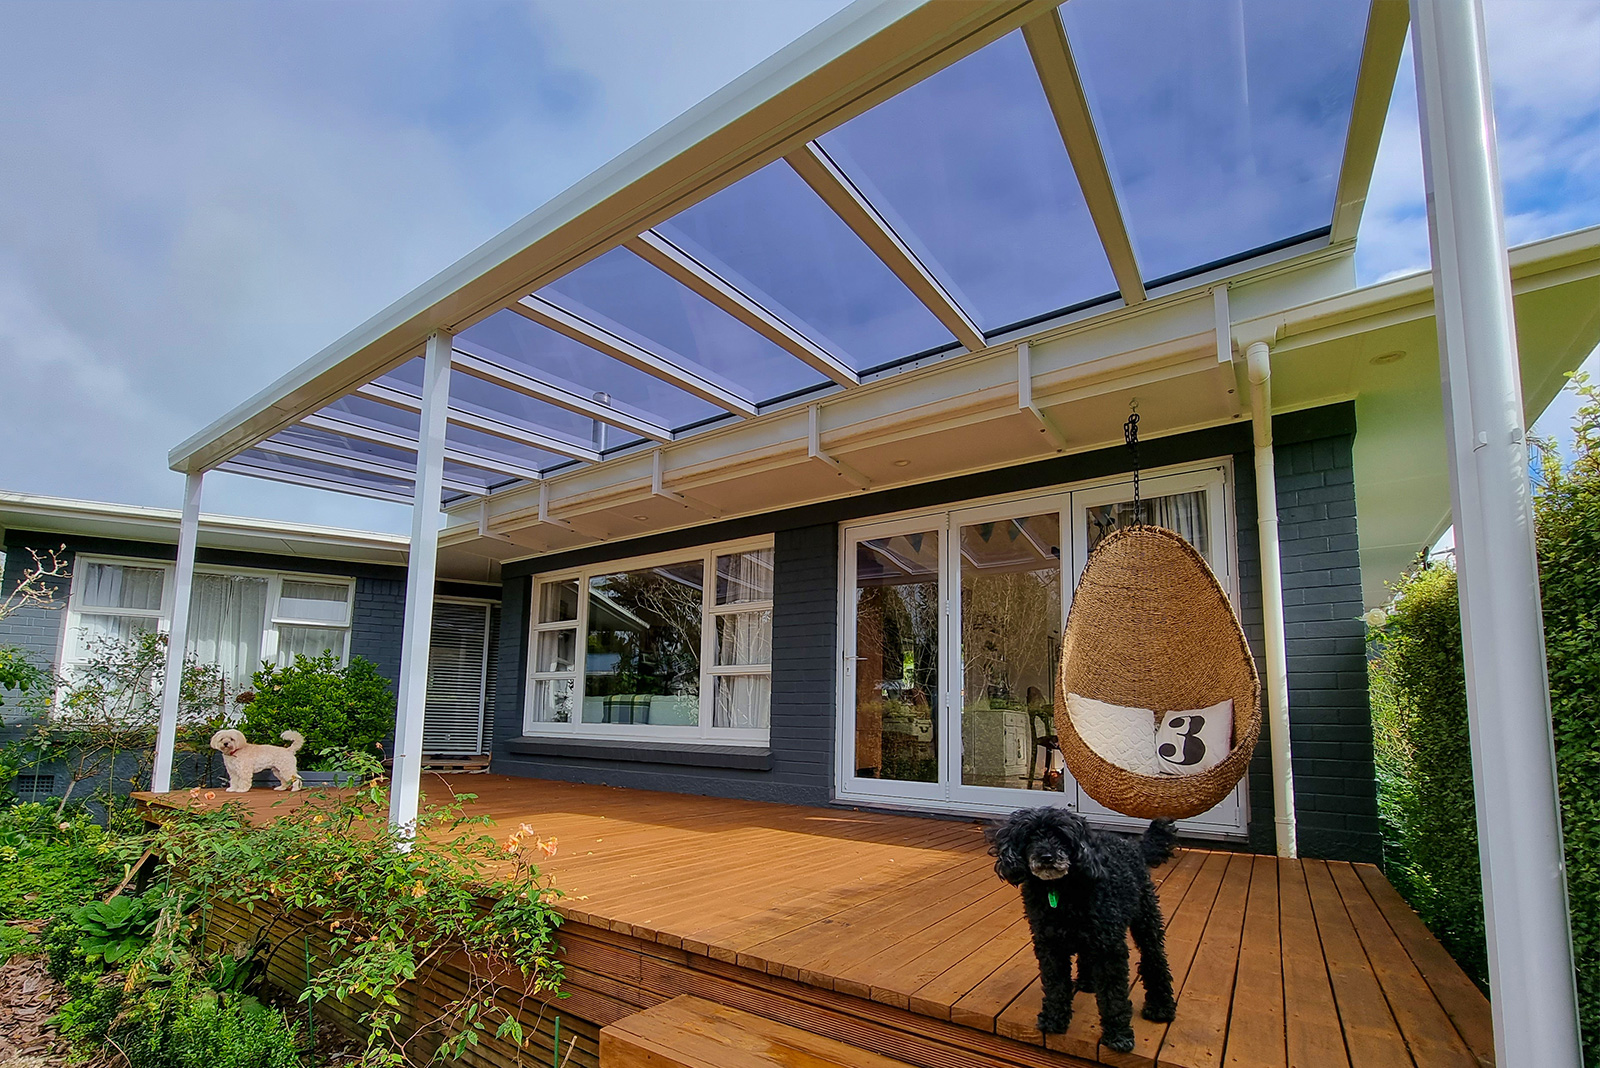 home shade systems with cantilever umbrellas and outdoor room systems